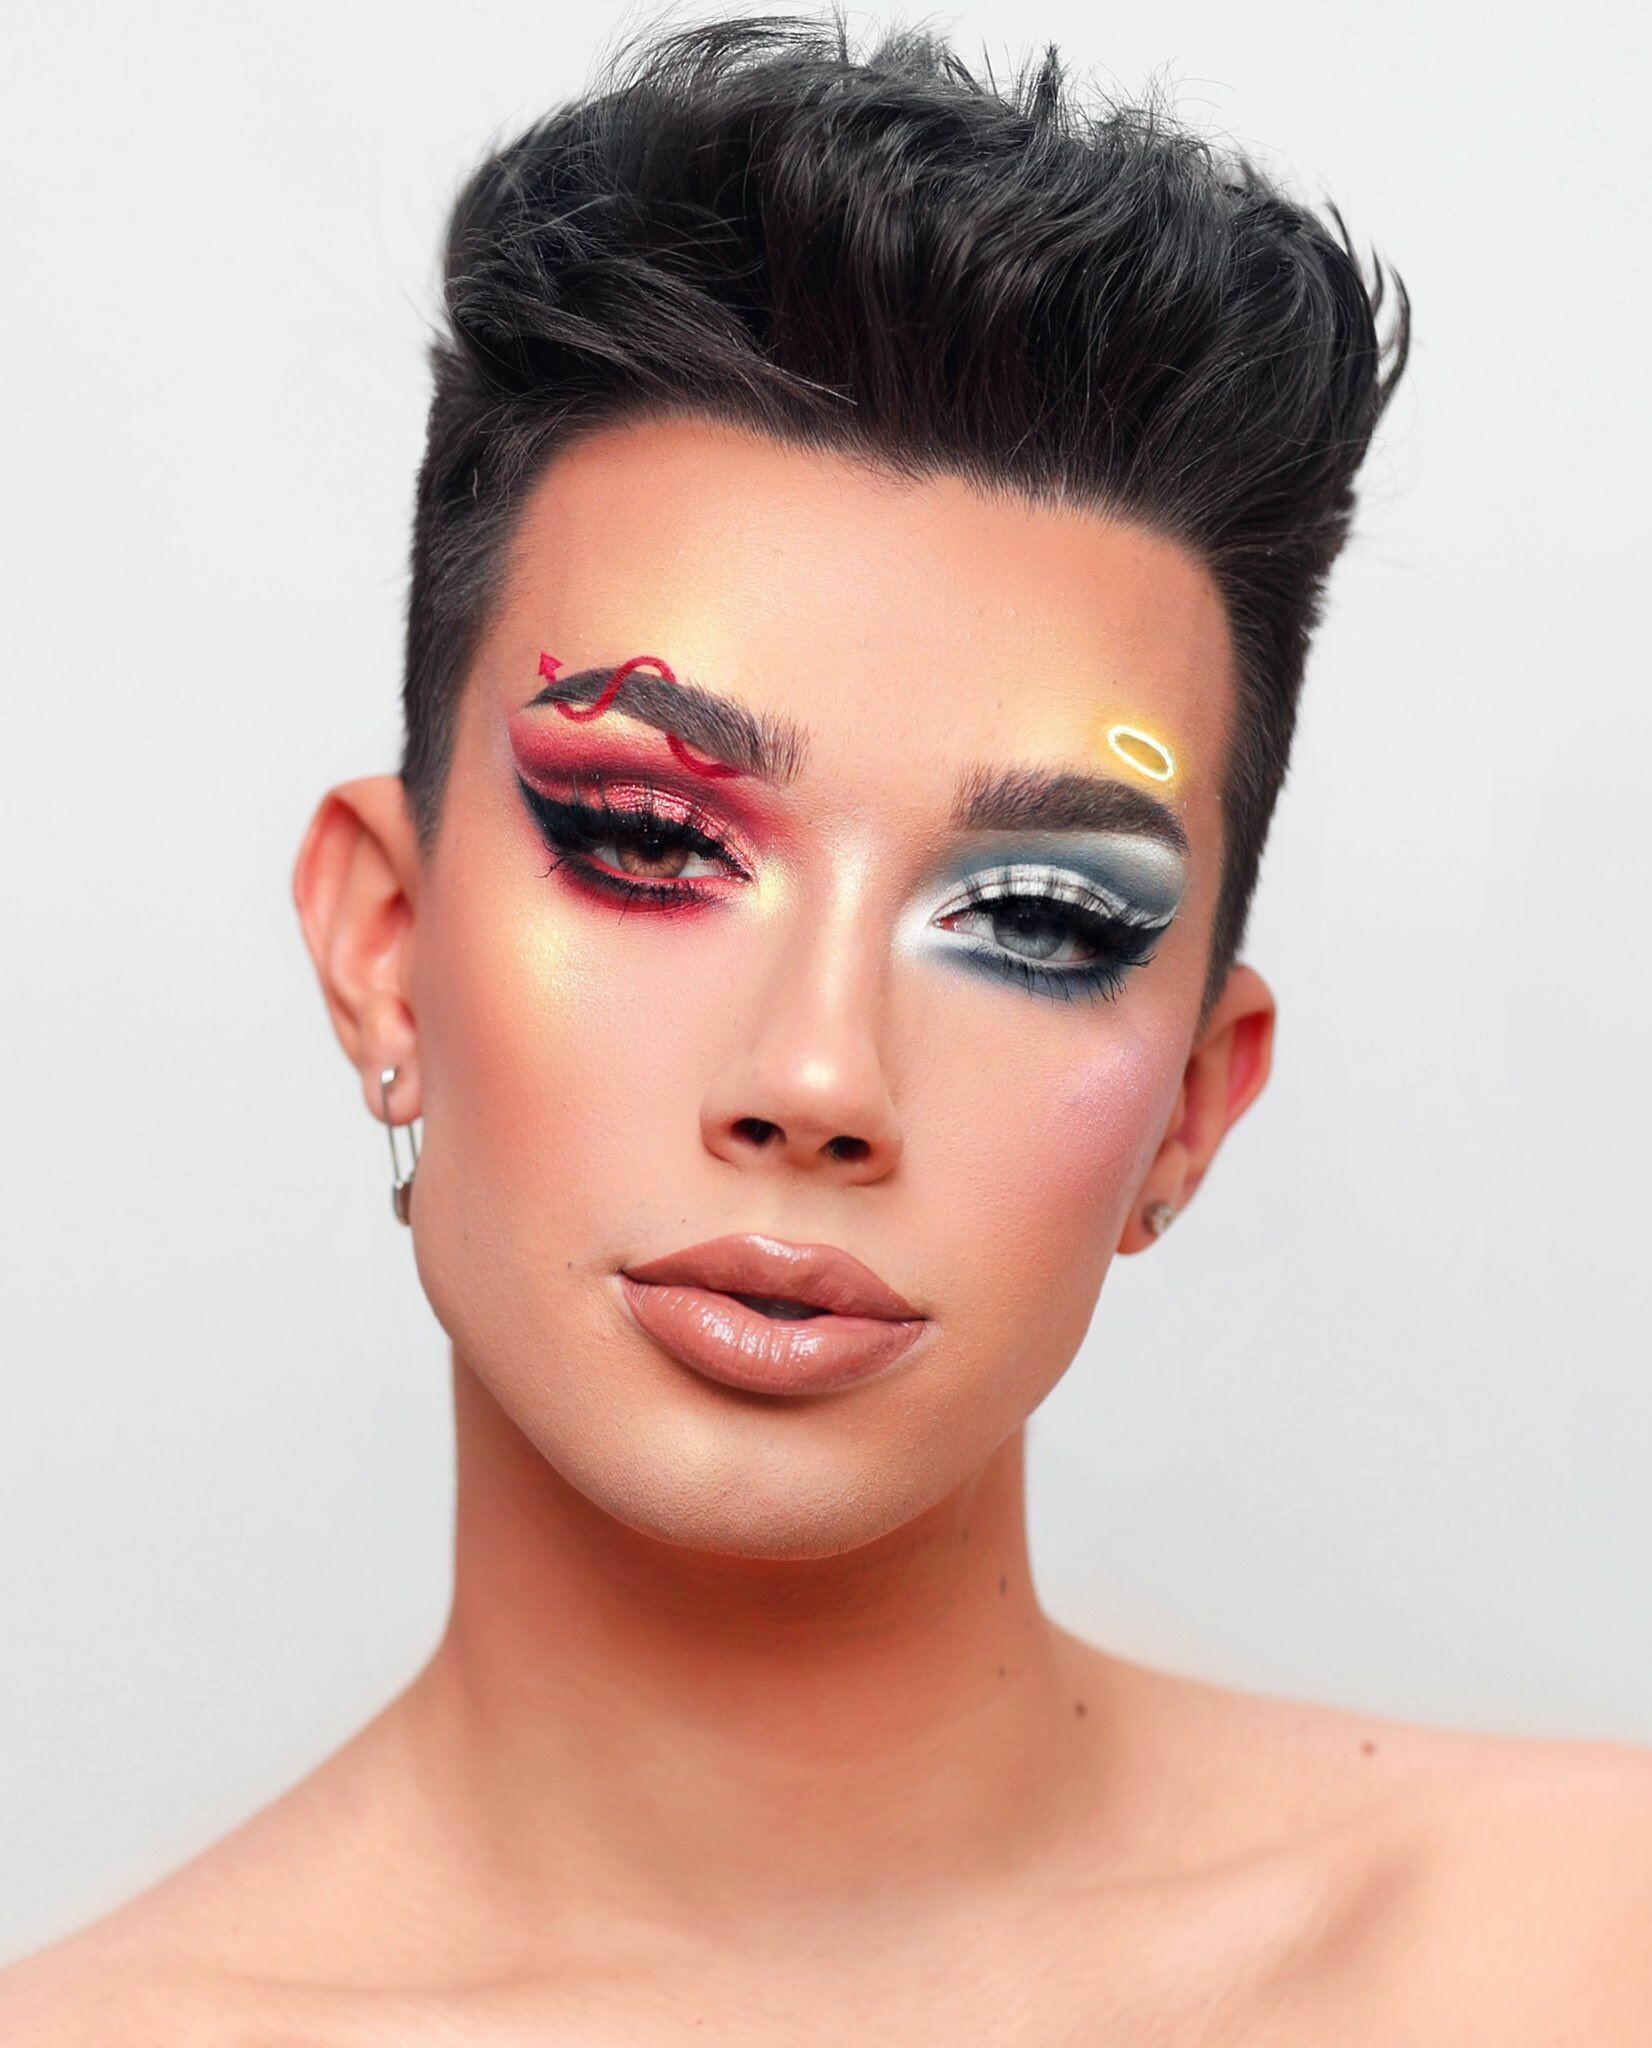 Download this wallpaper, James Charles, Celeb wallpapers, HD wallpapers, 1660x2050 HD Phone